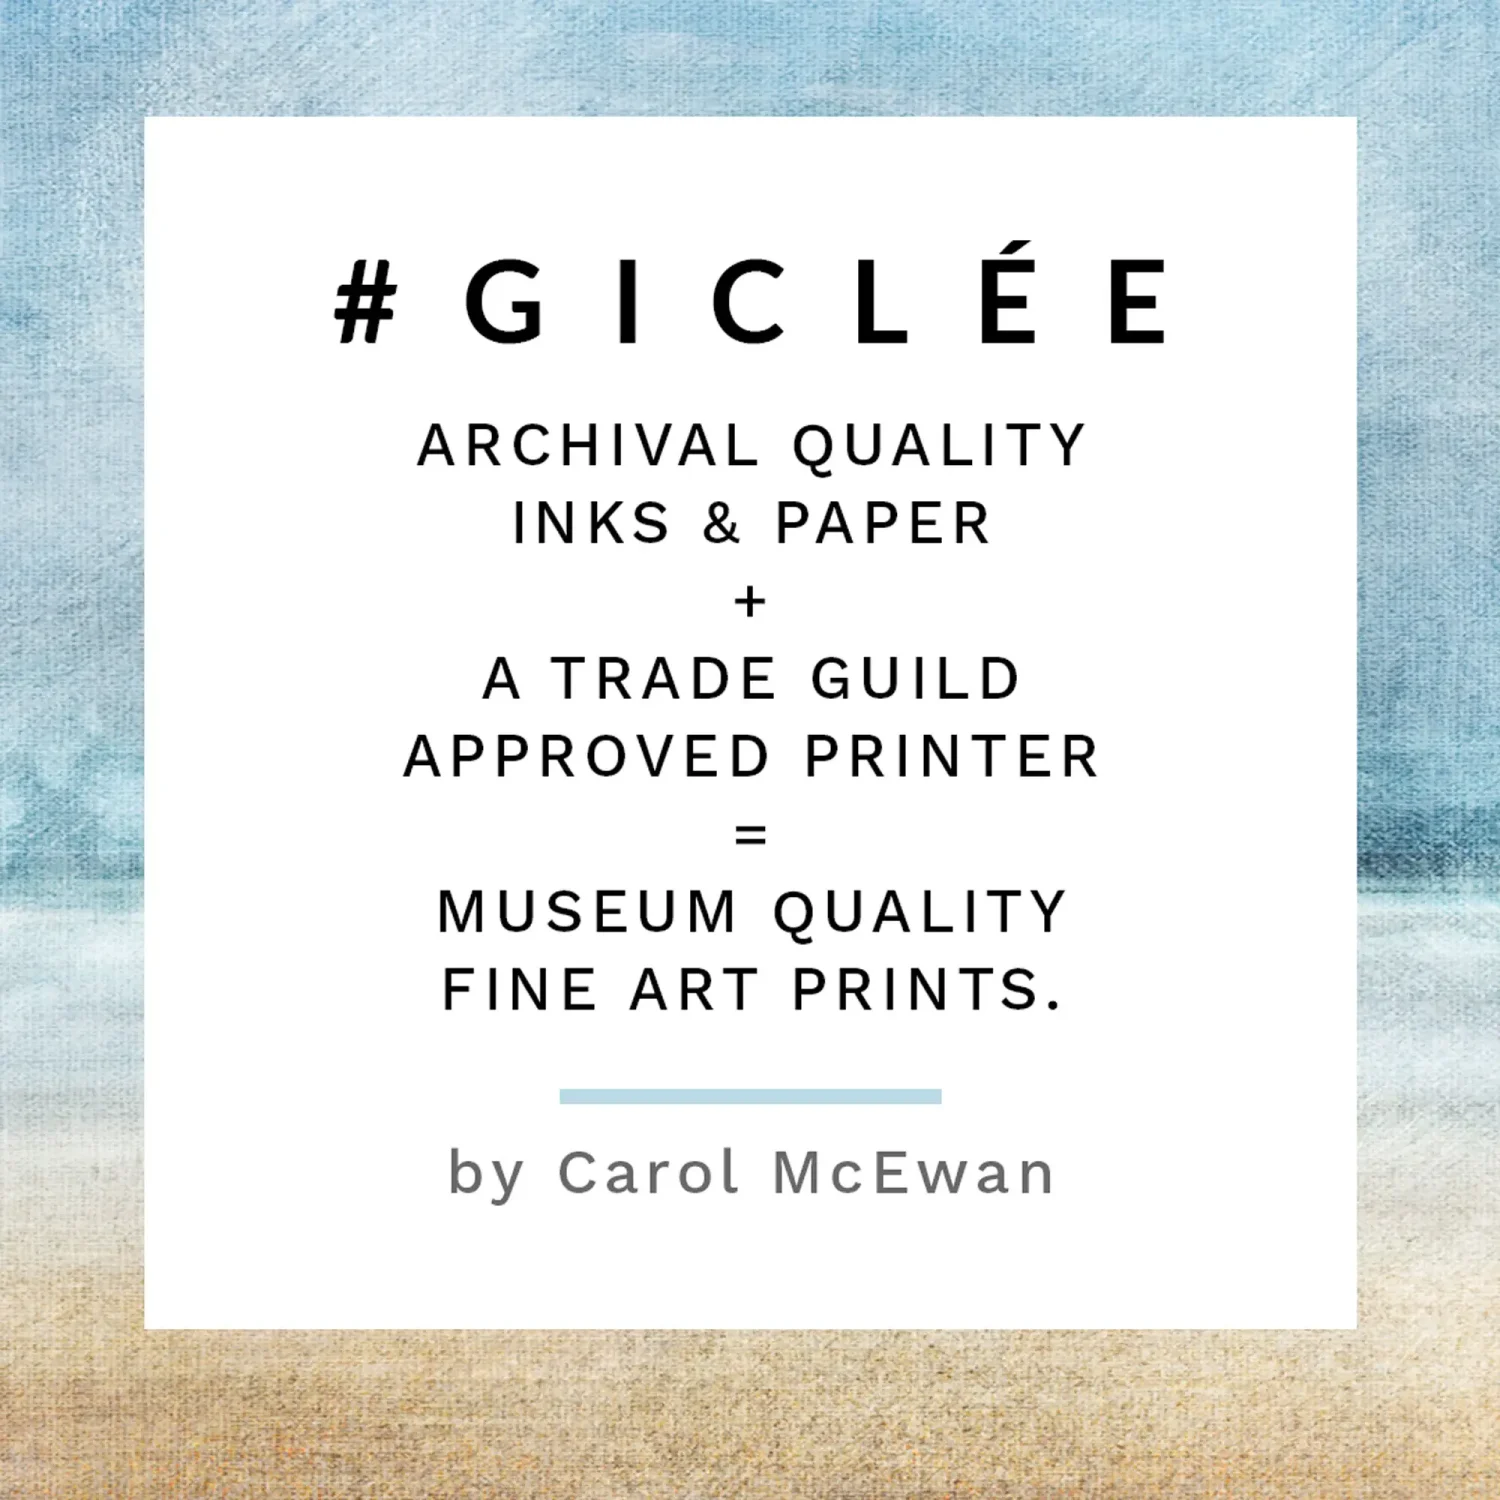 Giclee - archival quality inks & paper, a trade guild approved printer = museum quality fine art prints, by Carol McEwan